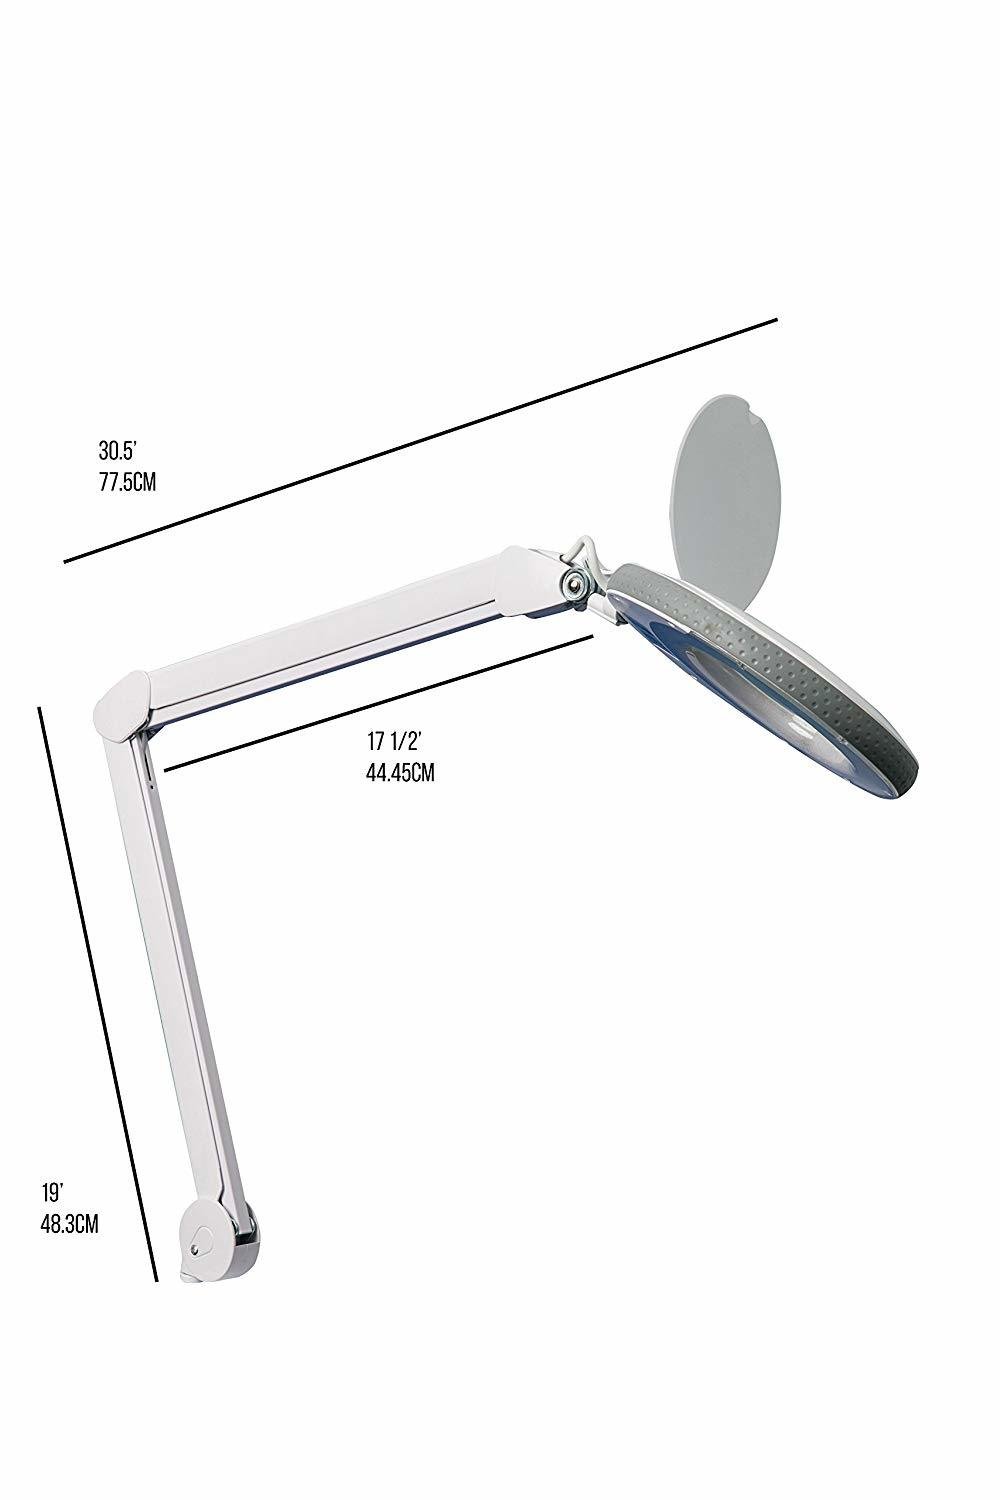 [generic] 5D Magnifying Lamp (with a C Clamp)